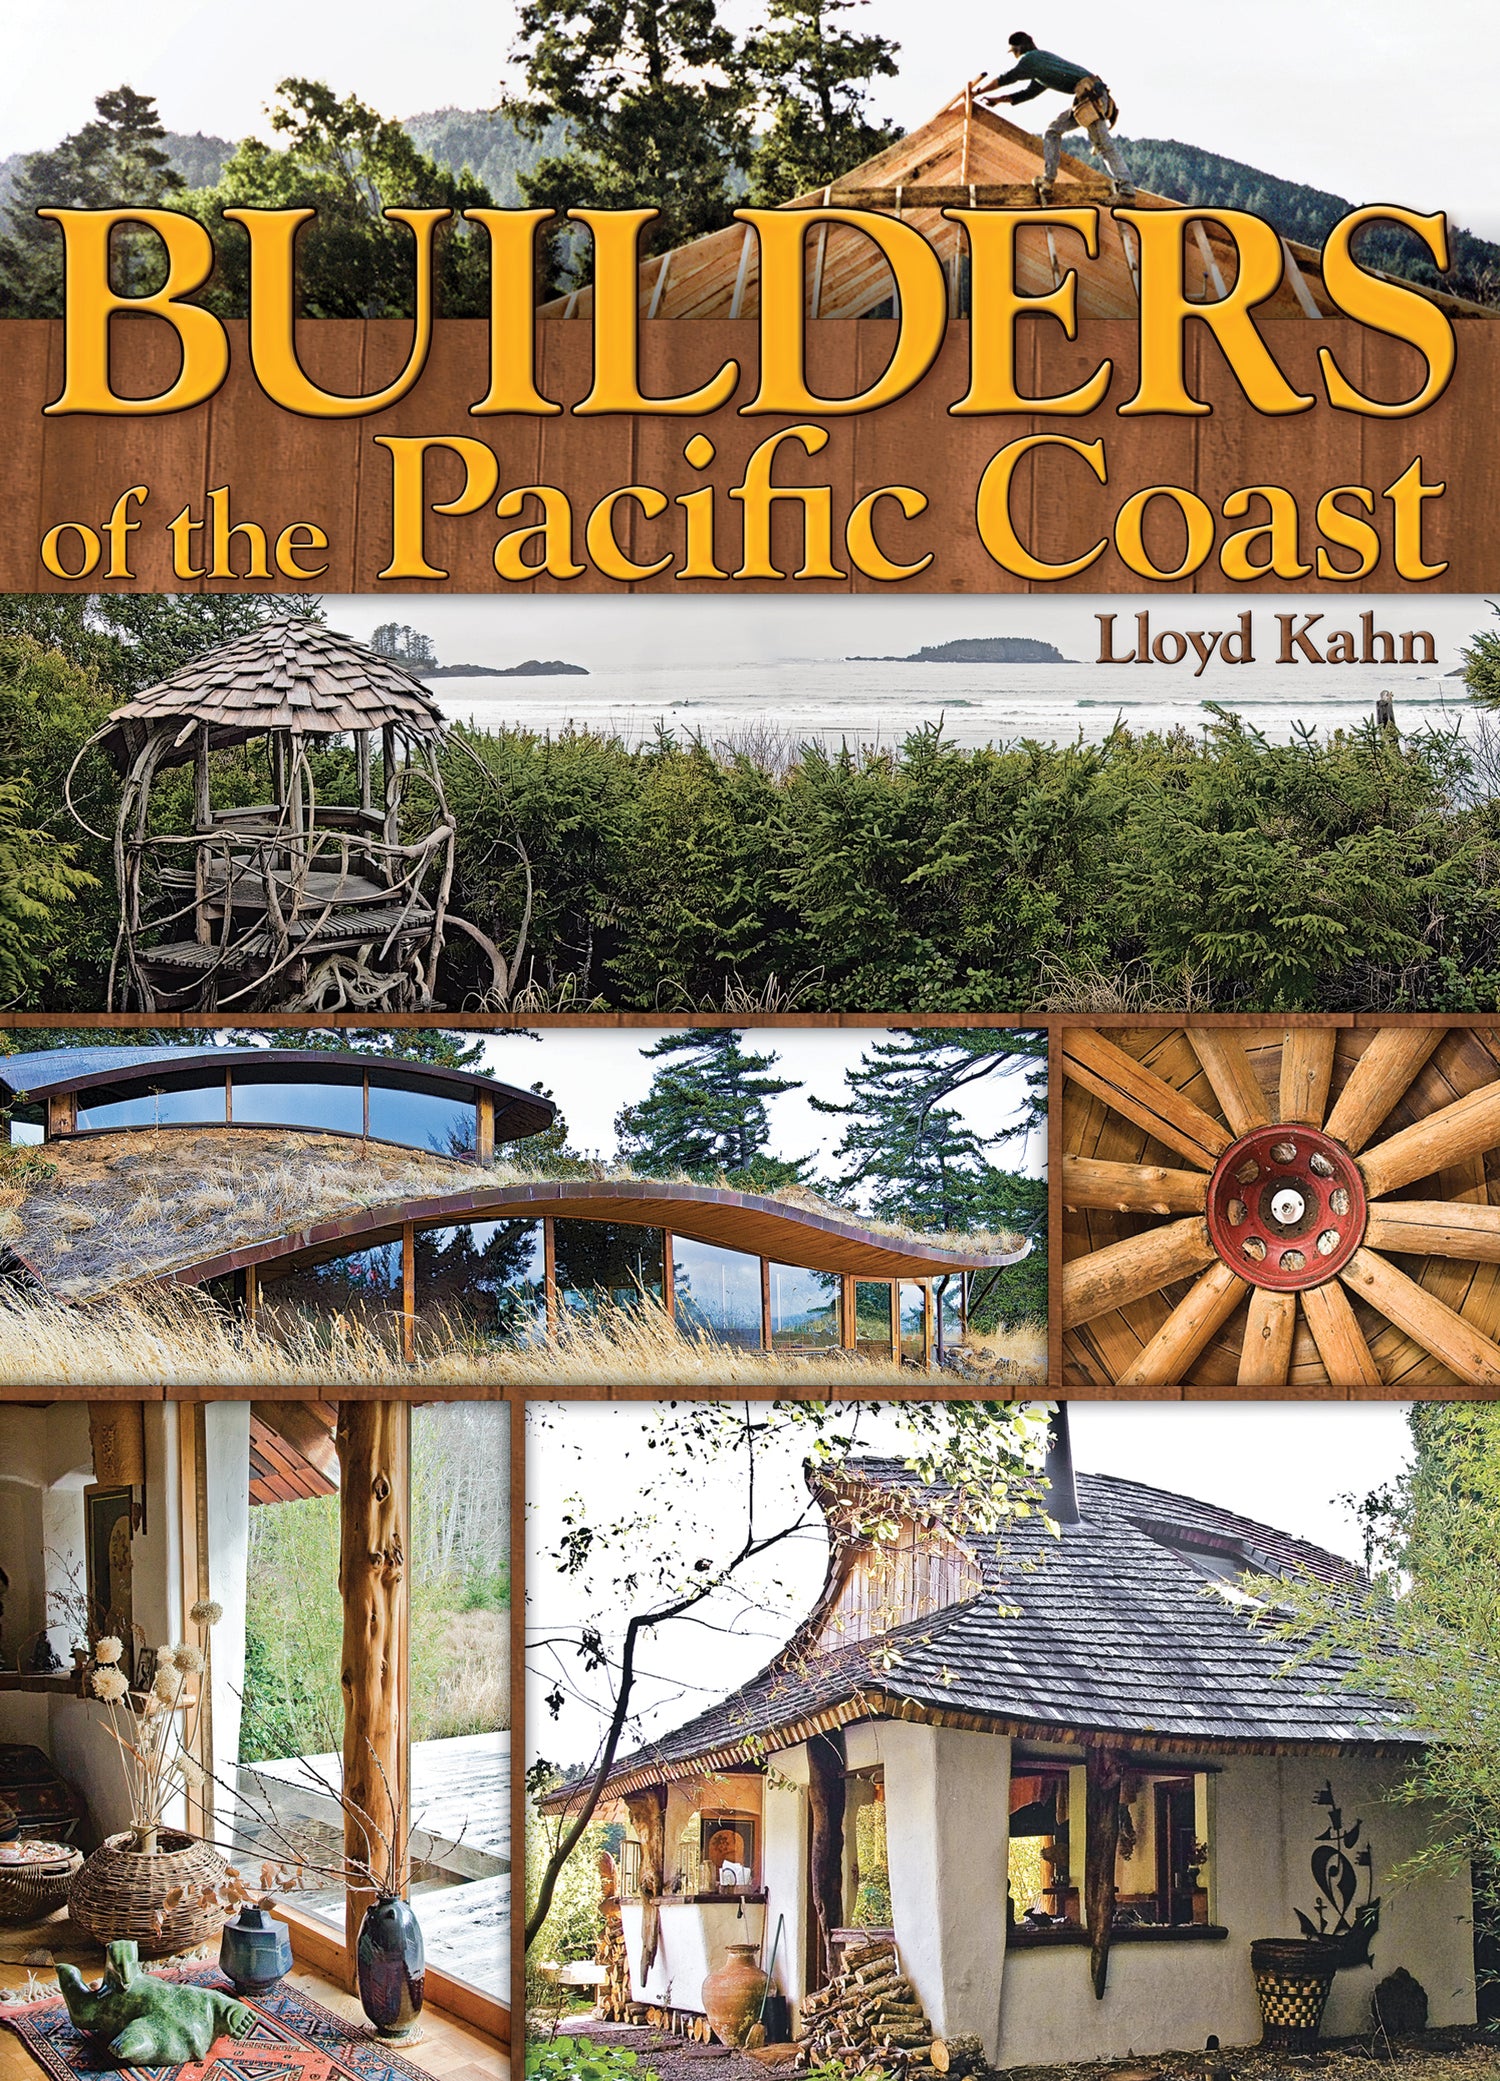 Builders of the Pacific Coast by Lloyd Kahn, front cover showing architecture along the west coast of the USA.  ISBN-10: 0936070439 ISBN-13: 978-0936070438